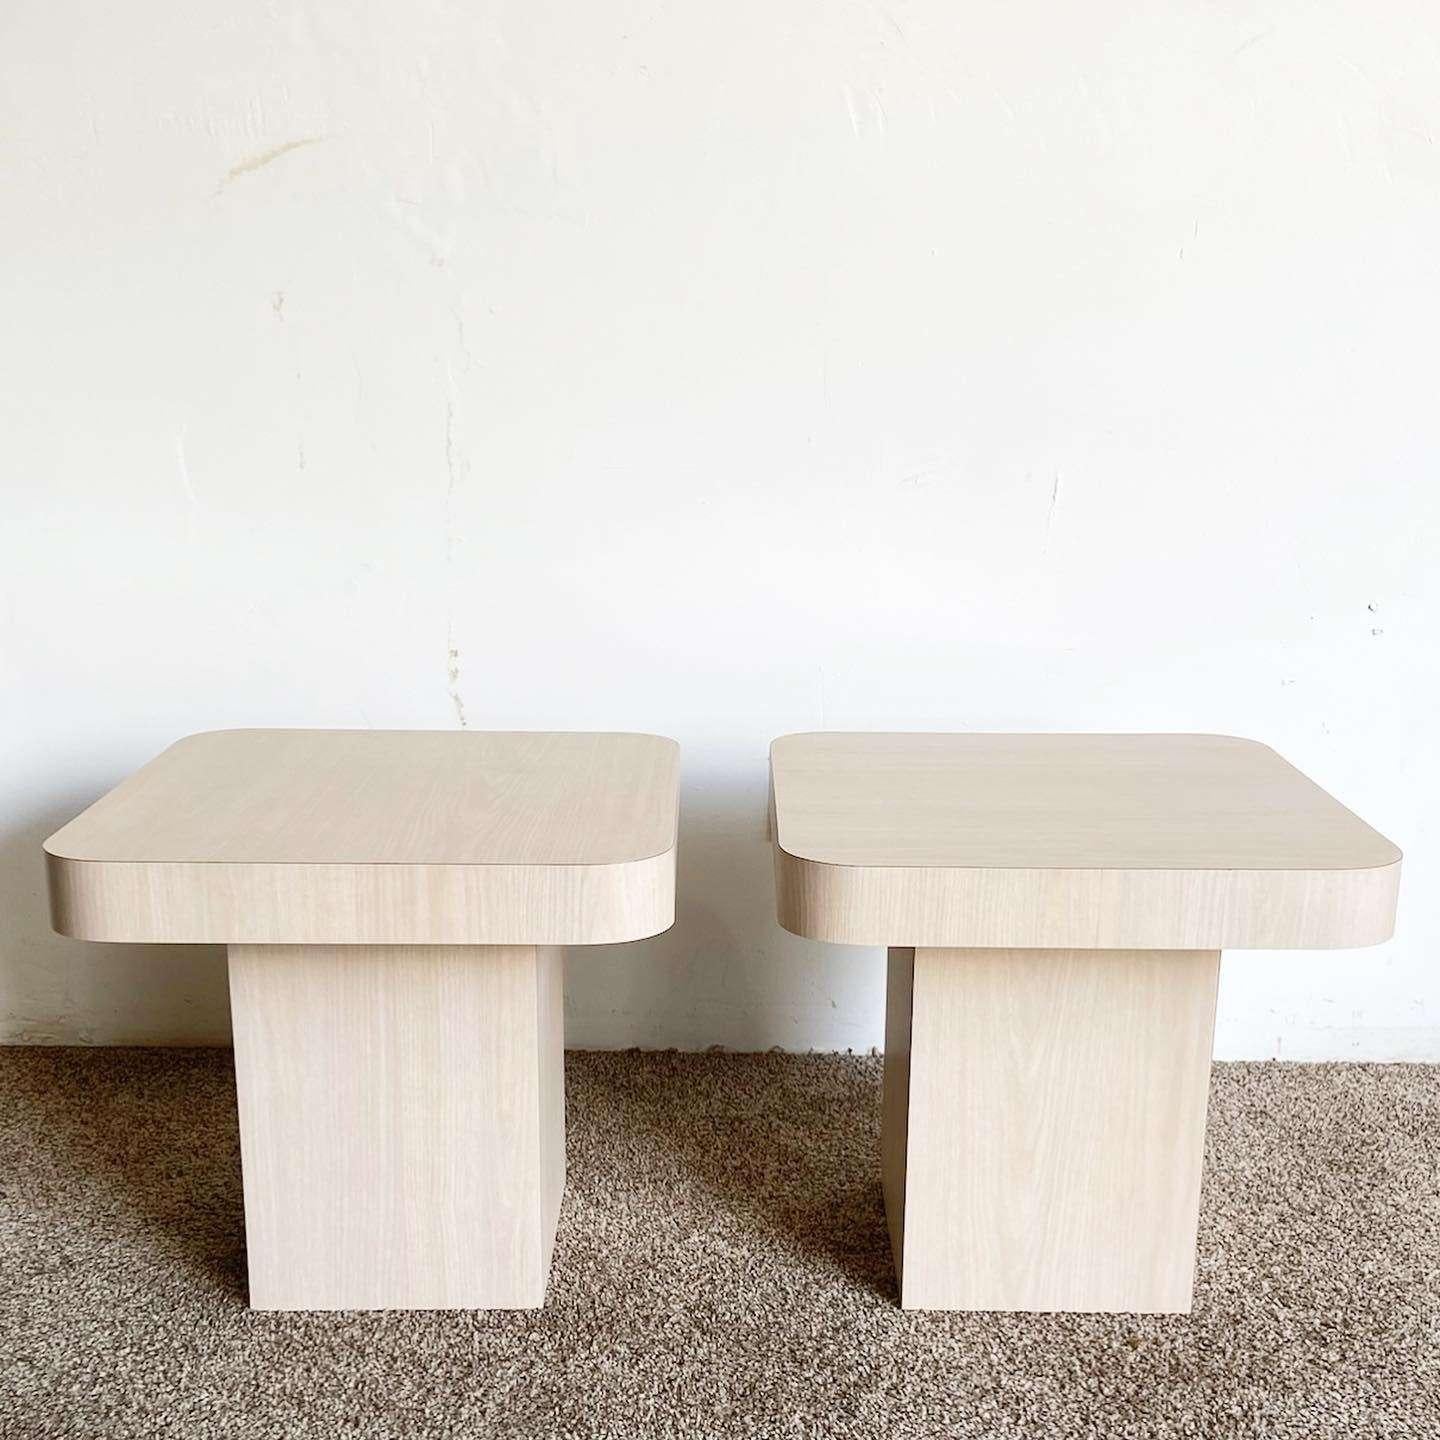 Incredible pair of vintage postmodern mushroom square top side tables. Each feature a washed Woodgrain laminate.